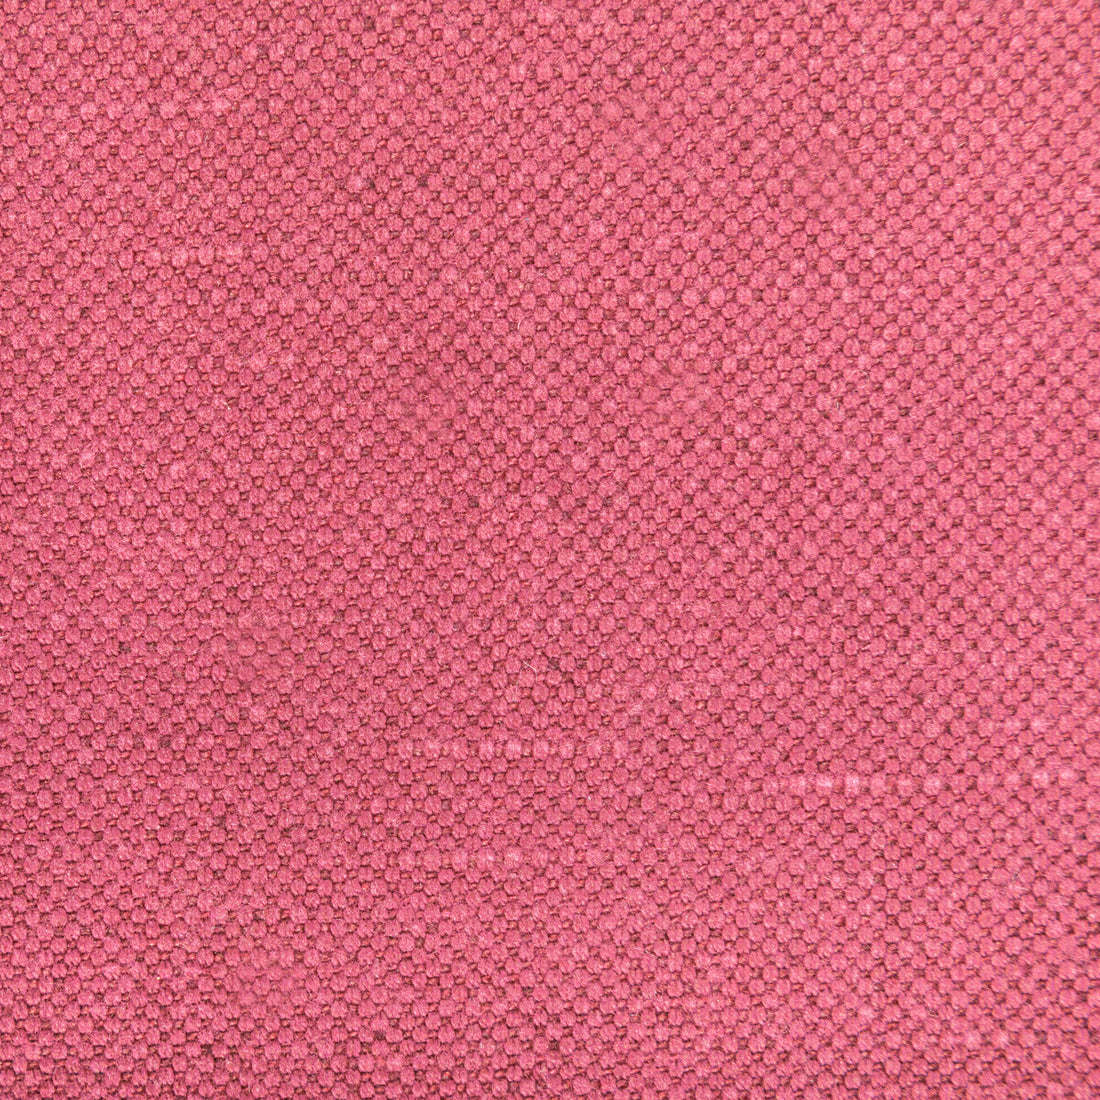 Carson fabric in cerise color - pattern 36282.197.0 - by Kravet Basics